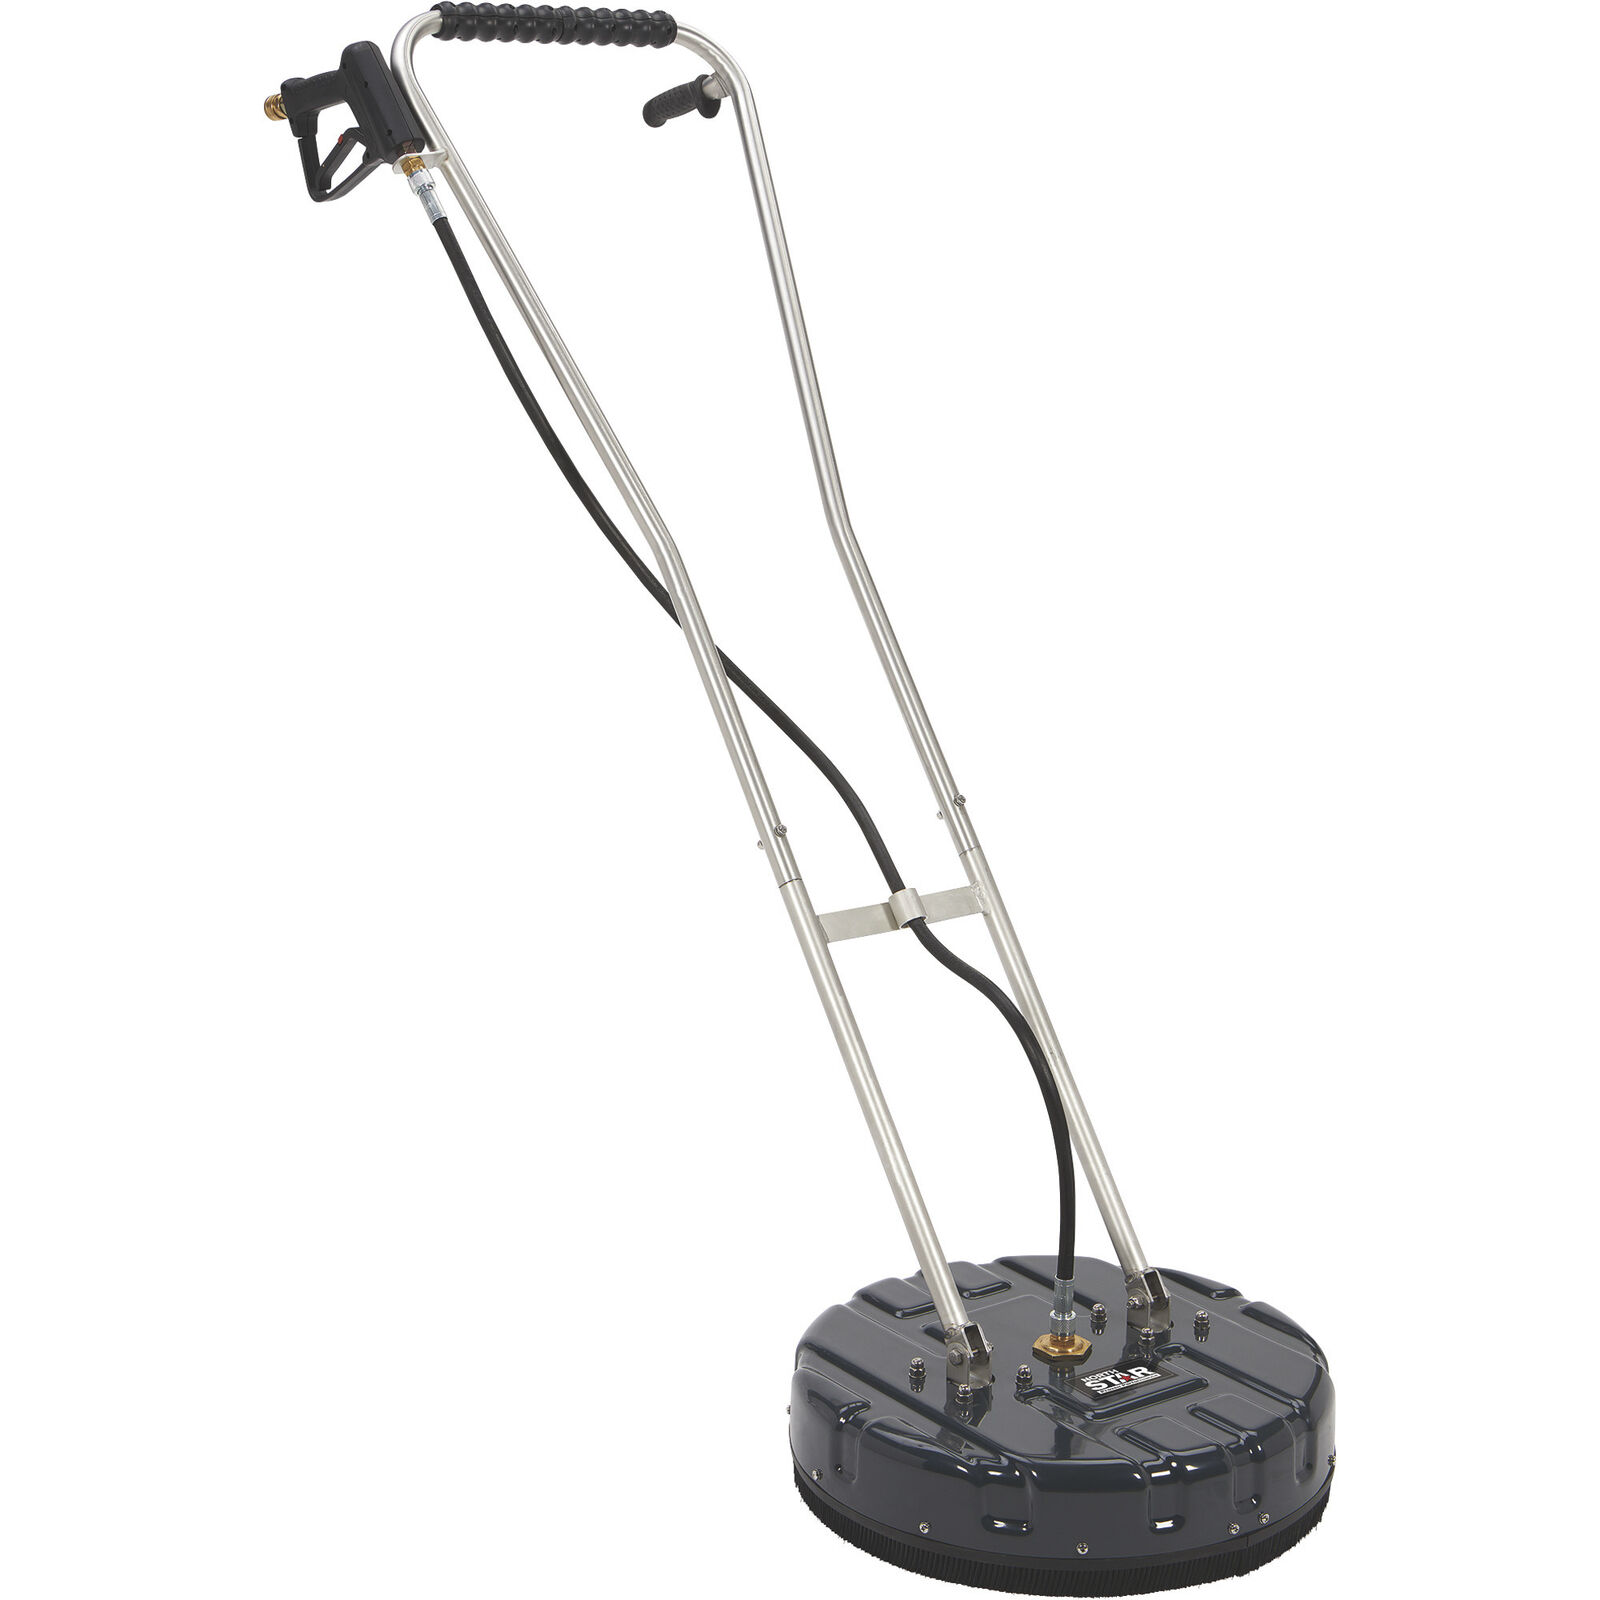 NorthStar Pressure Washer Surface Cleaner, 20in., 5000 PSI, 8.0 GPM, Stainless